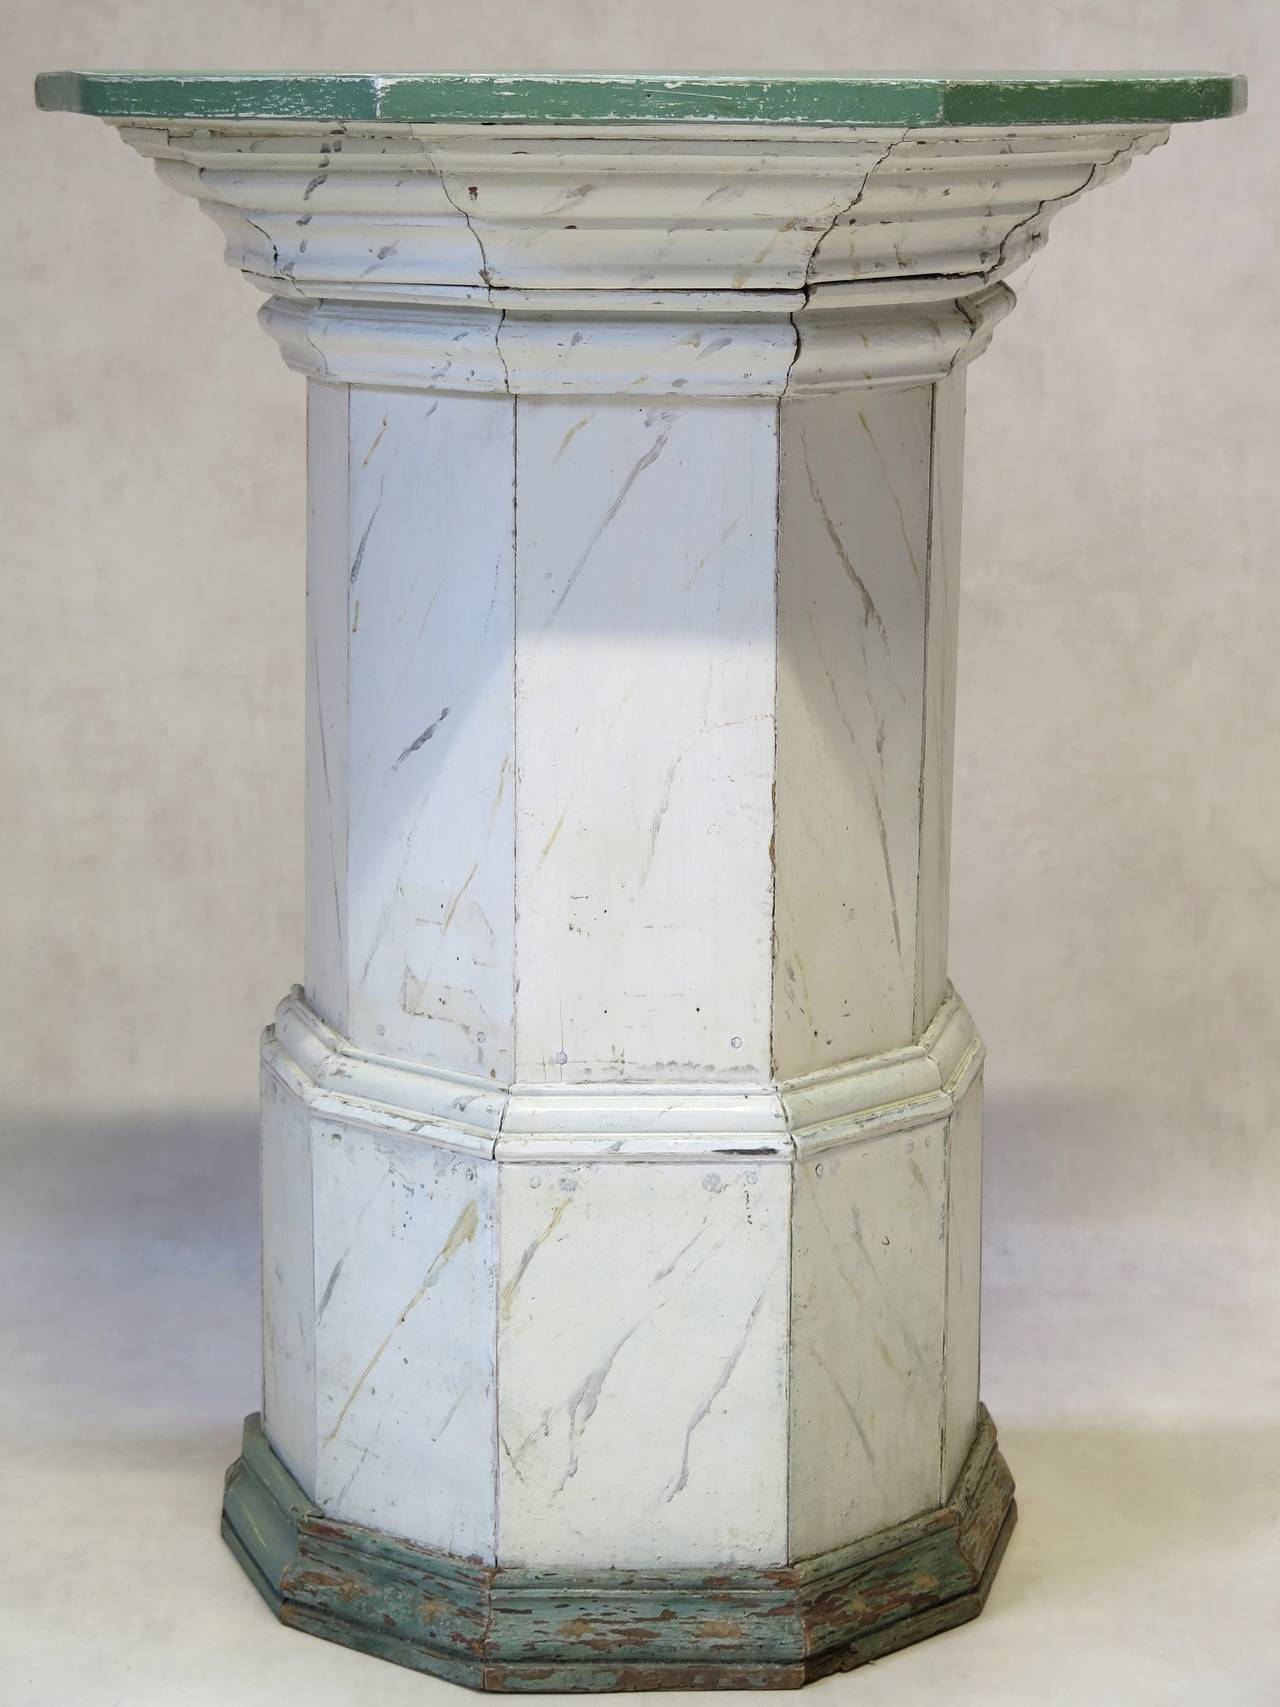 Unusual faceted wooden column or pedestal, painted in off-white trompe-l'oeil of Carrara marble, with a verdigris plinth, and light green top.